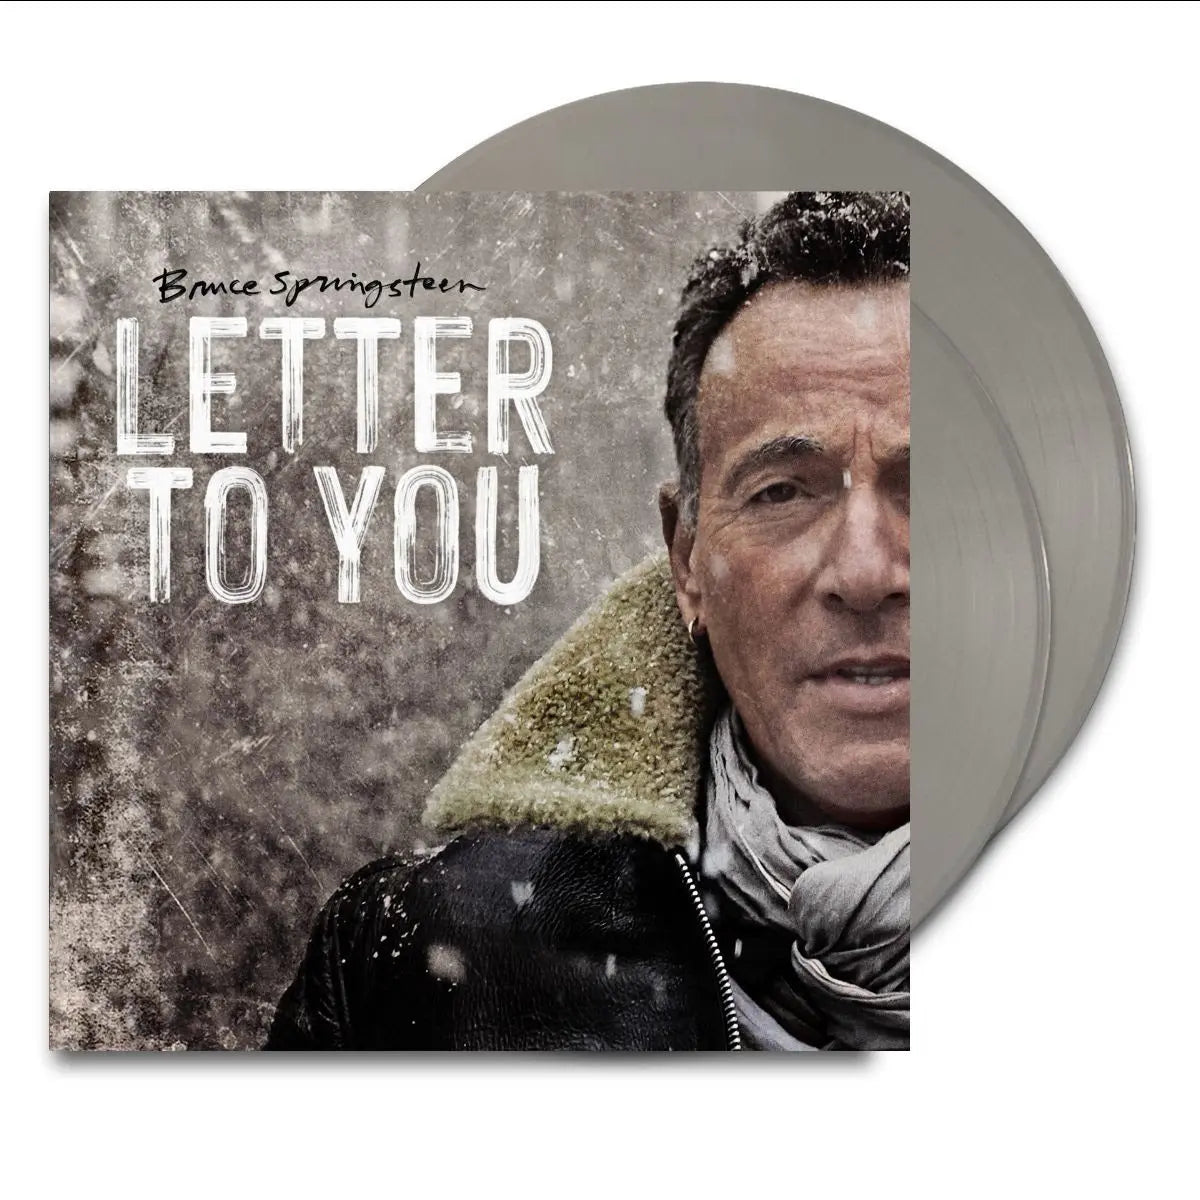 Bruce Springsteen - Letter To You [Colored Vinyl LP, Gray]